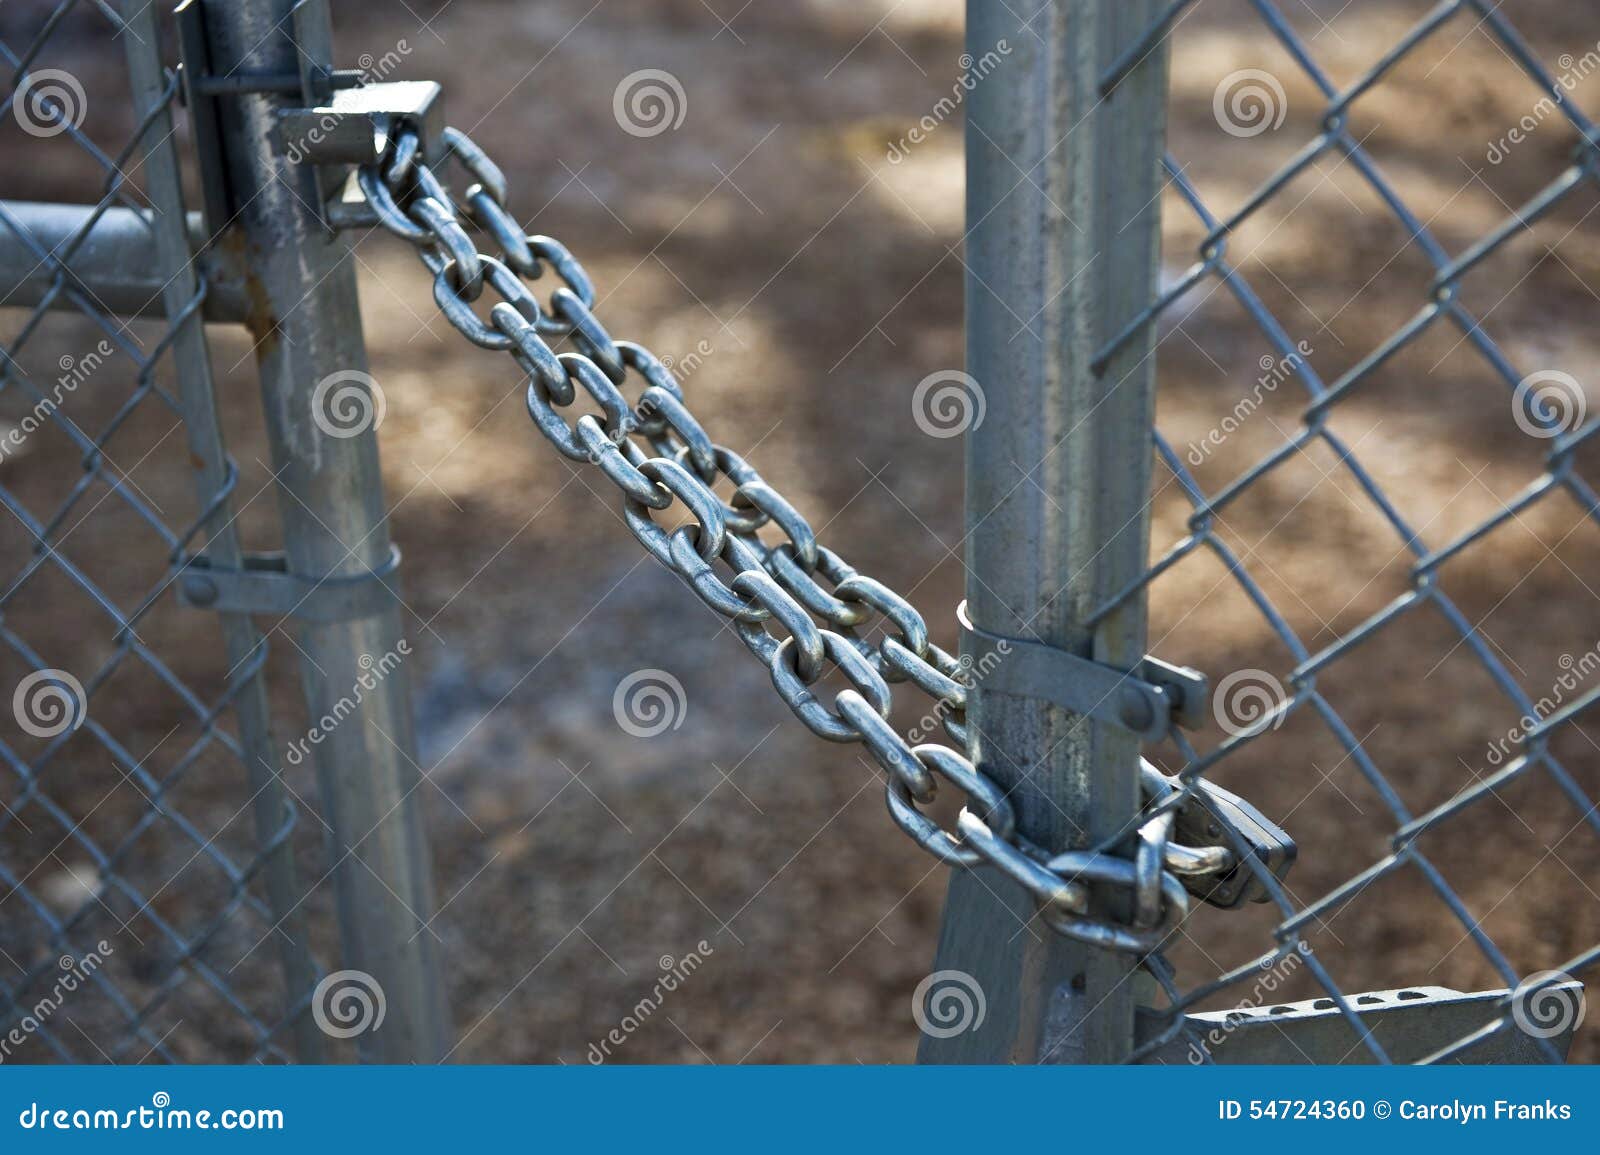 strong chain lock.